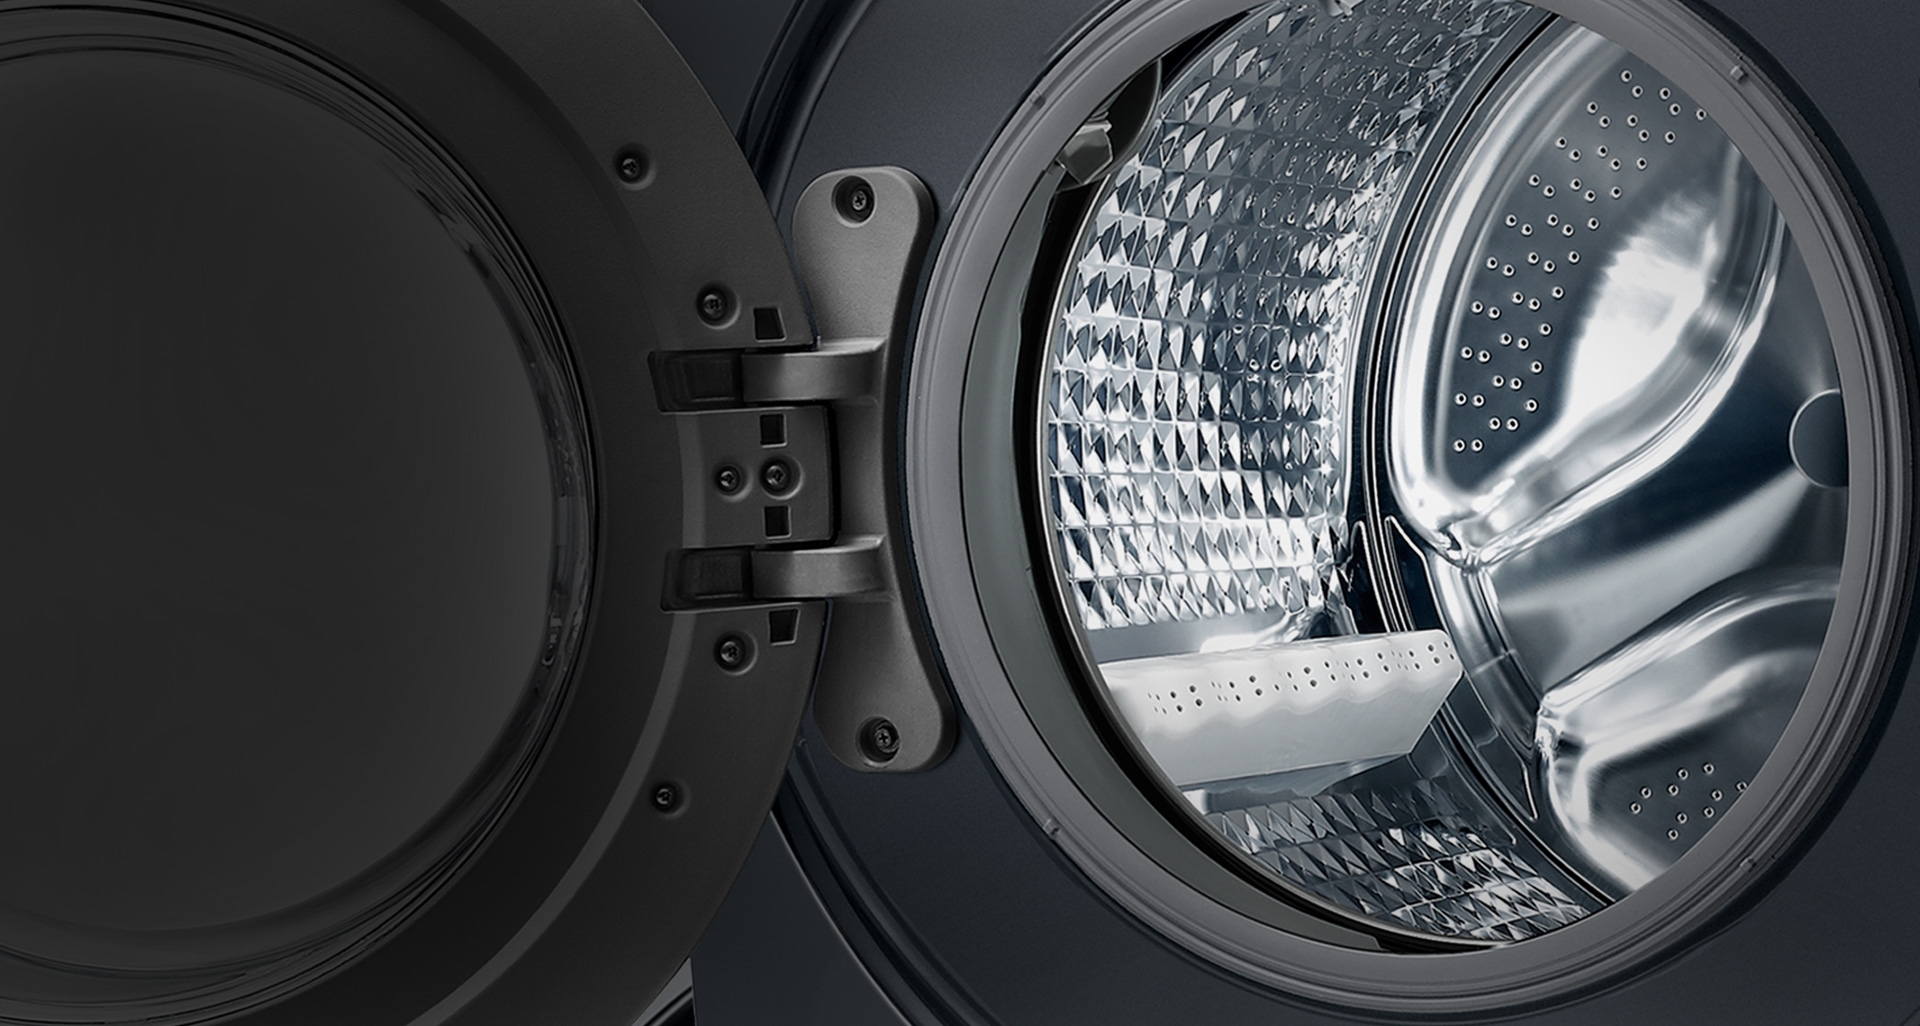 Australia’s 1st Ultra Large Capacity Washer with Wi-Fi*** – wash up to 15kg with Power Bubble**